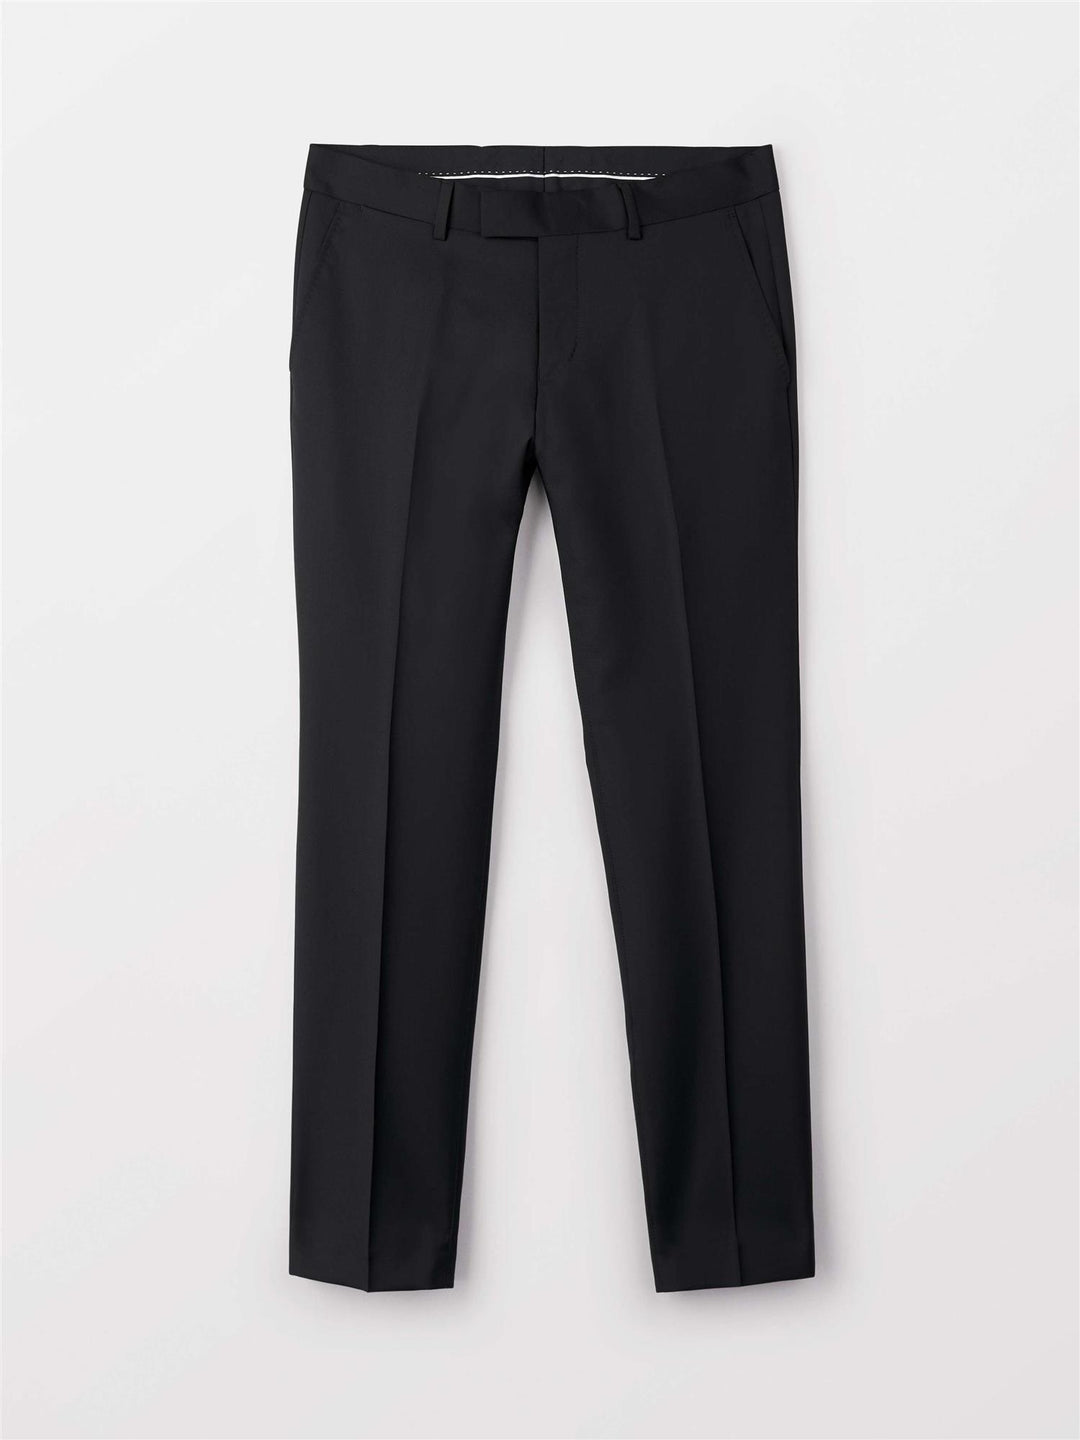 TAIN TROUSERS  Black